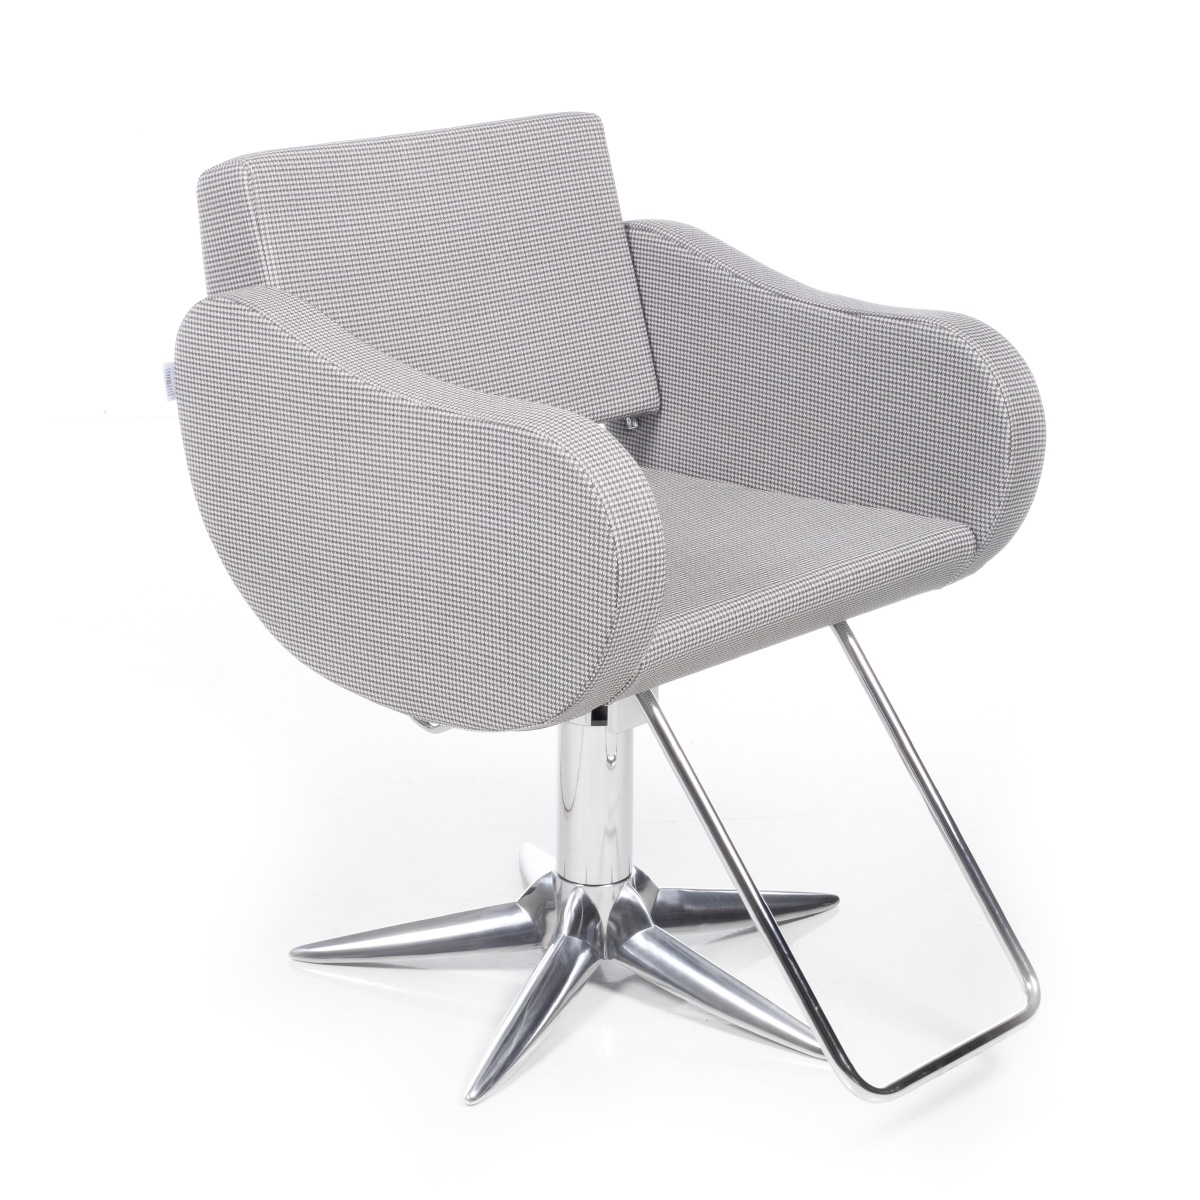 Fifties Parrot Styling Chair by Gamma and Bross - GNB-GSF1001PN